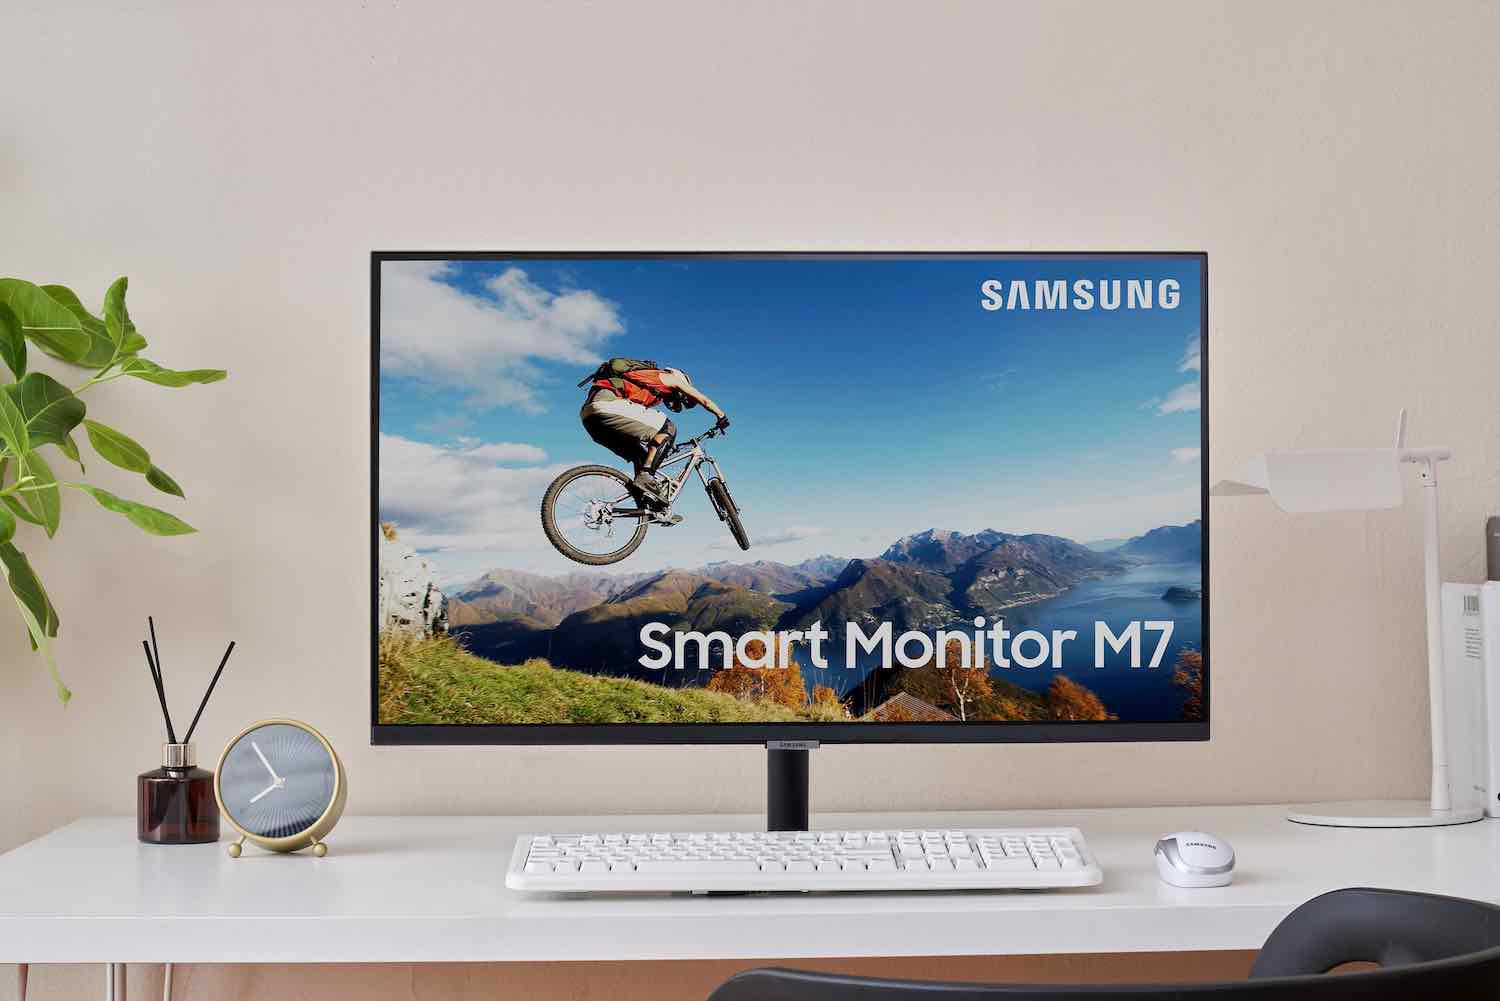 What's the difference between a smart monitor and a smart TV